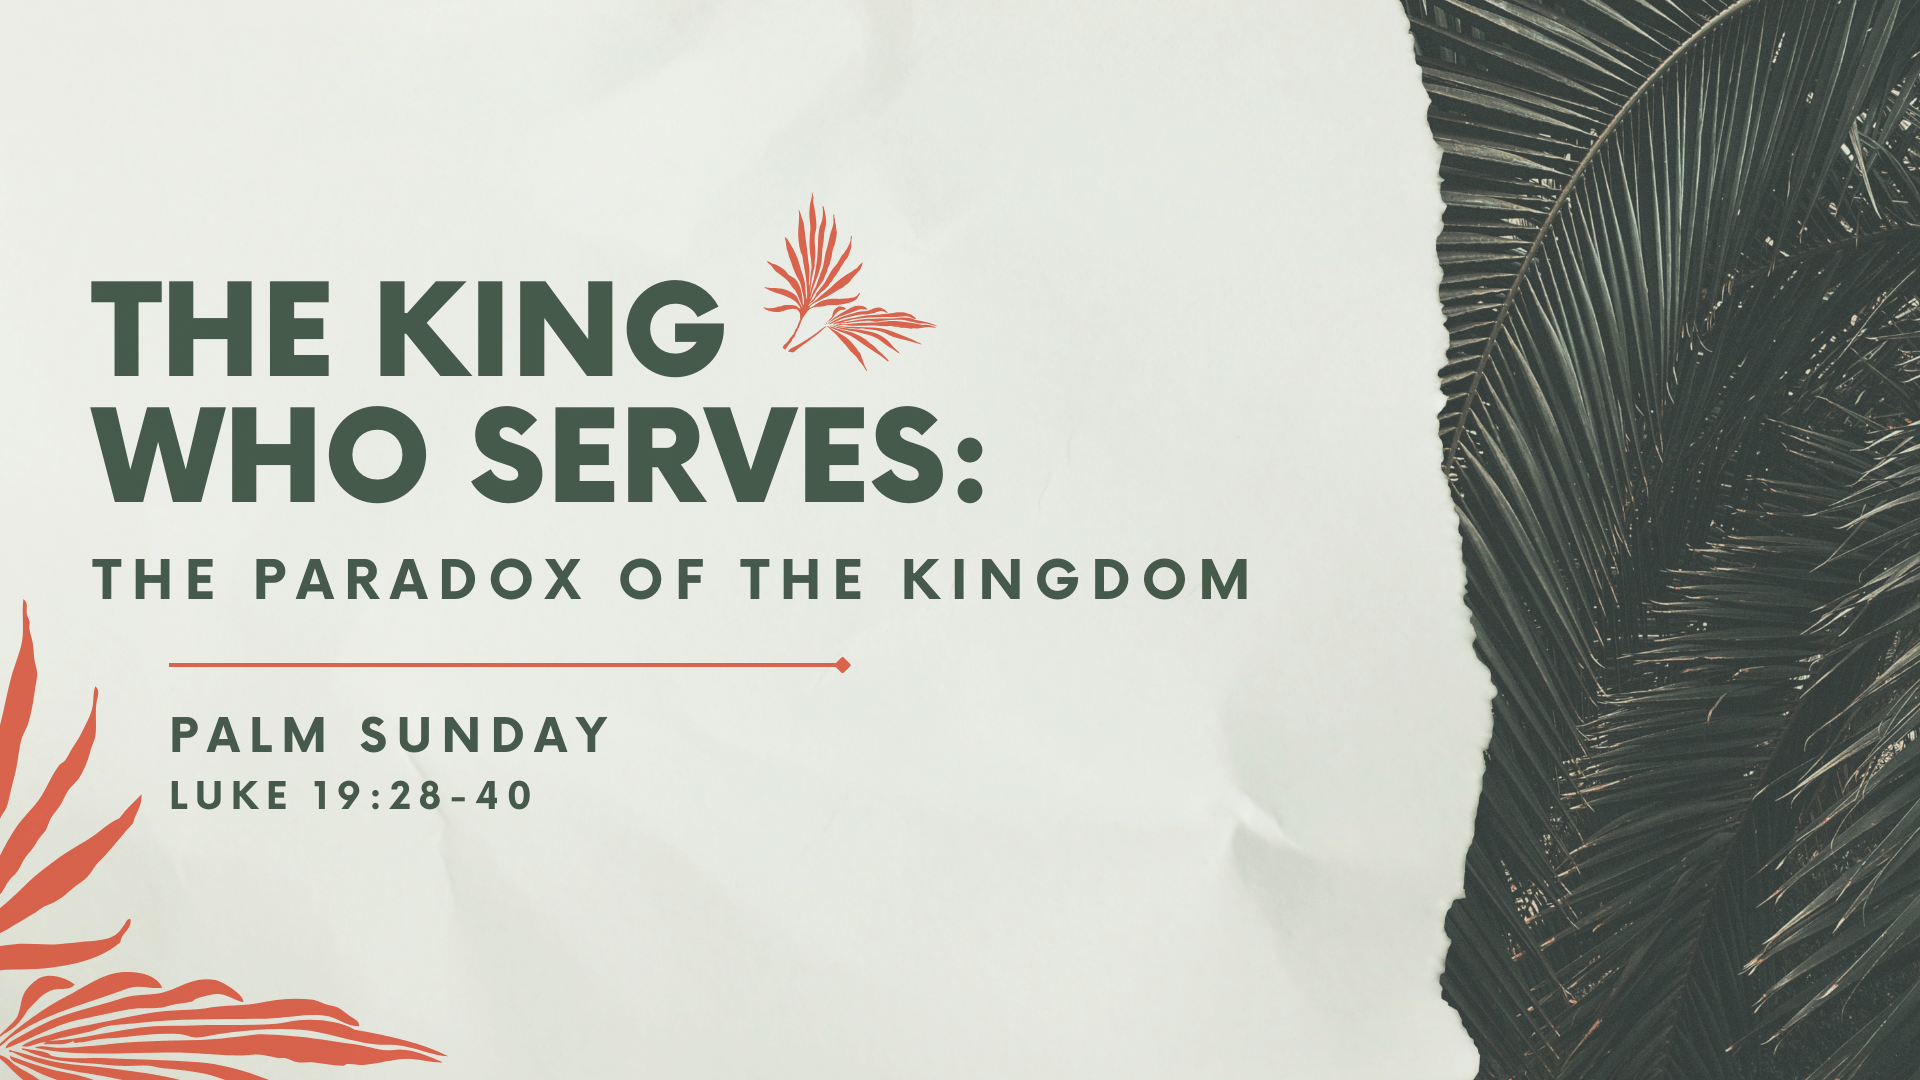 The King Who Serves: The Paradox of the Kingdom